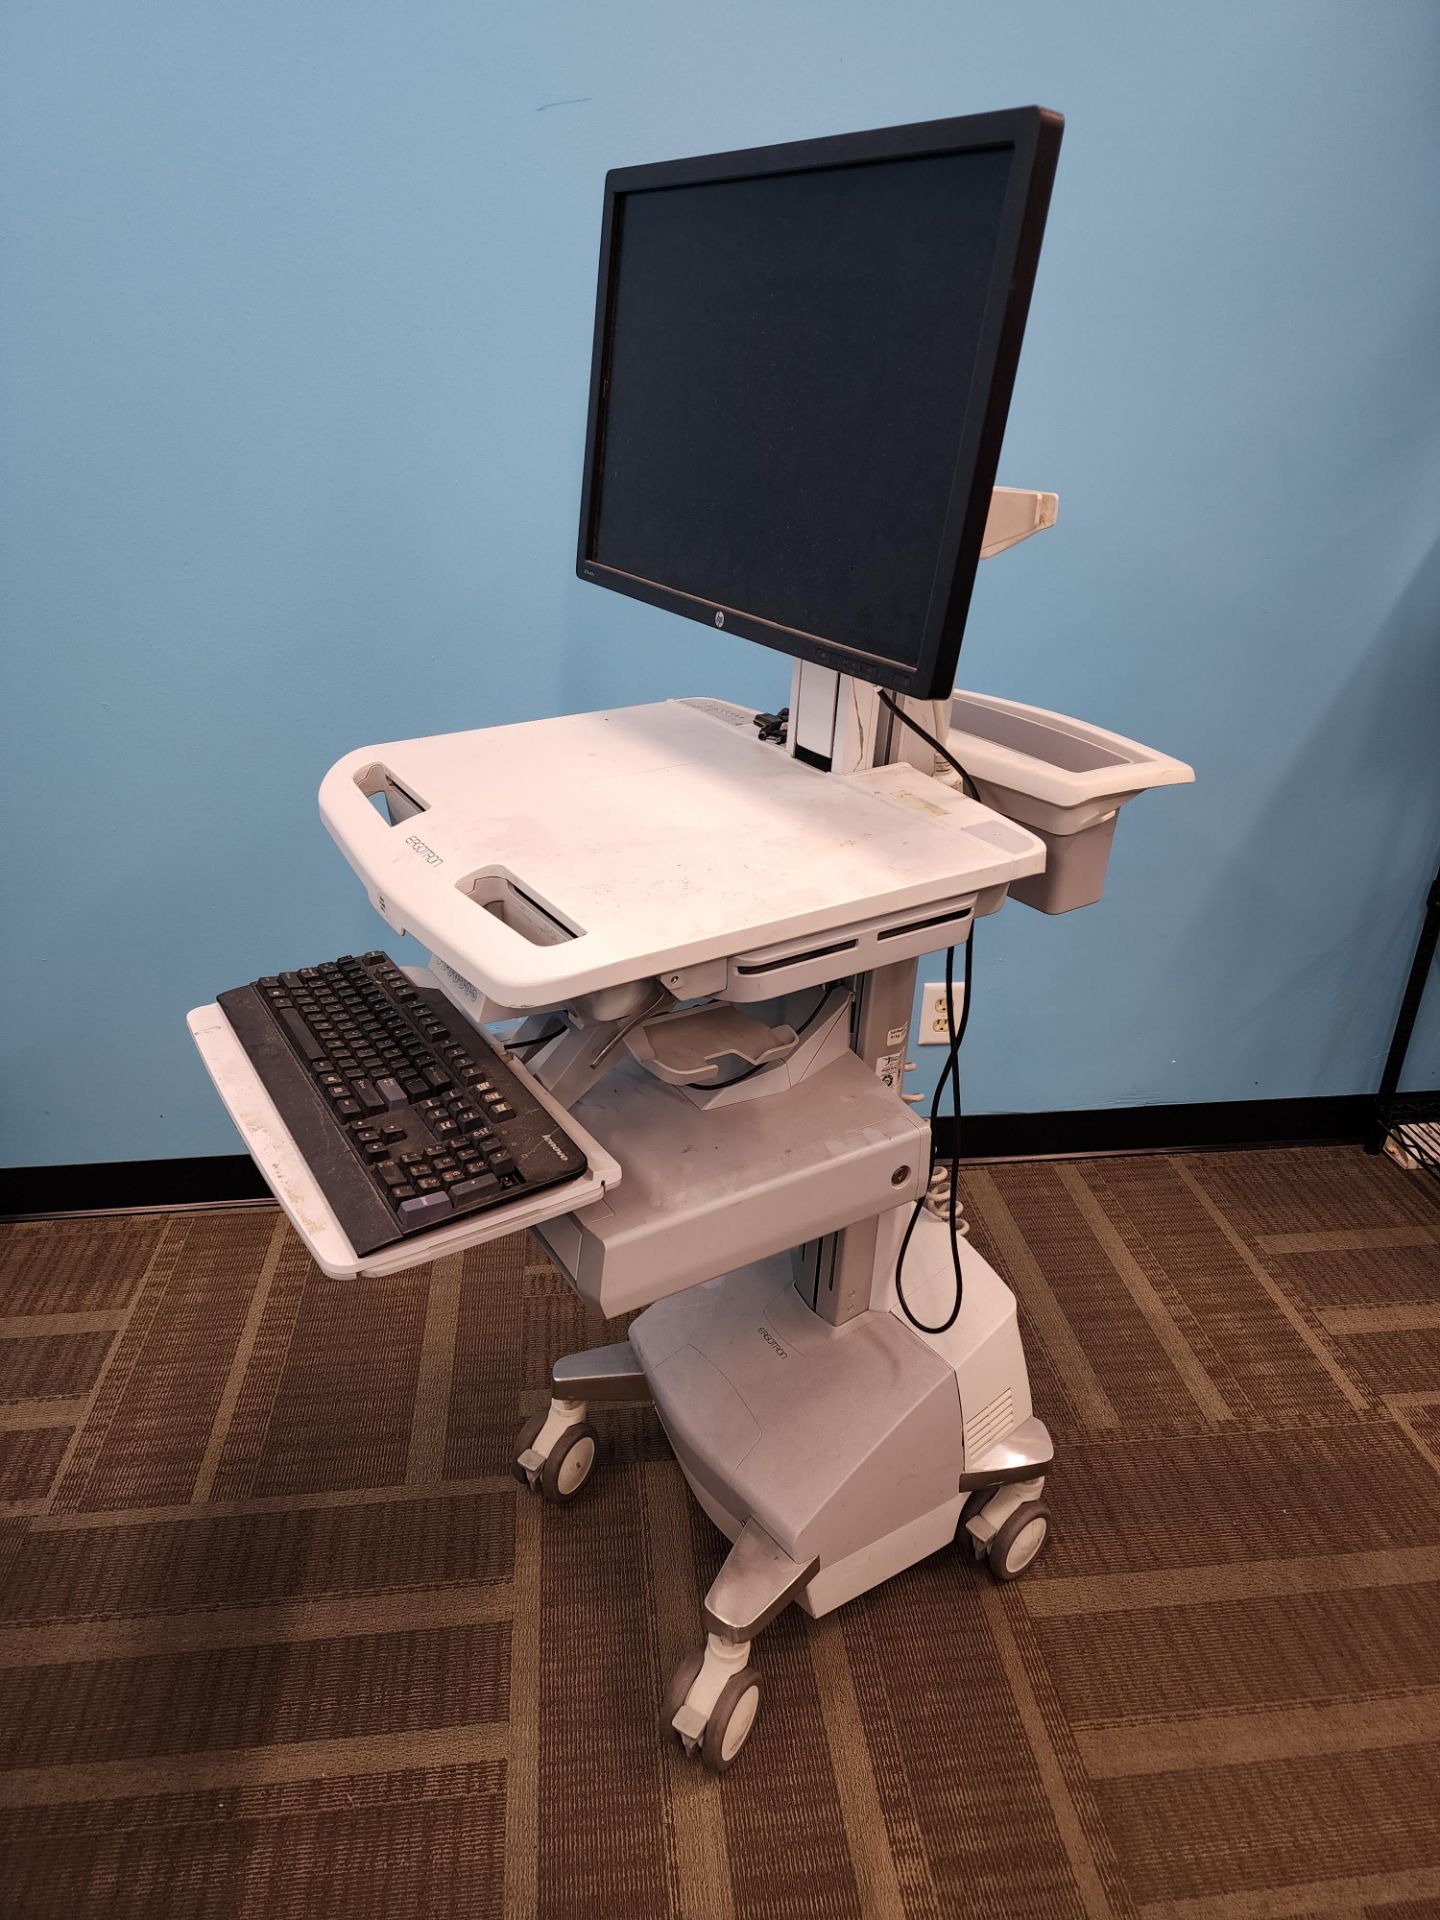 ErgoTron Model SV42-3311-1 "StyleView" Medical Cart w/LCD Mount & HP Monitor, SLA Powered, 1 - Image 7 of 10